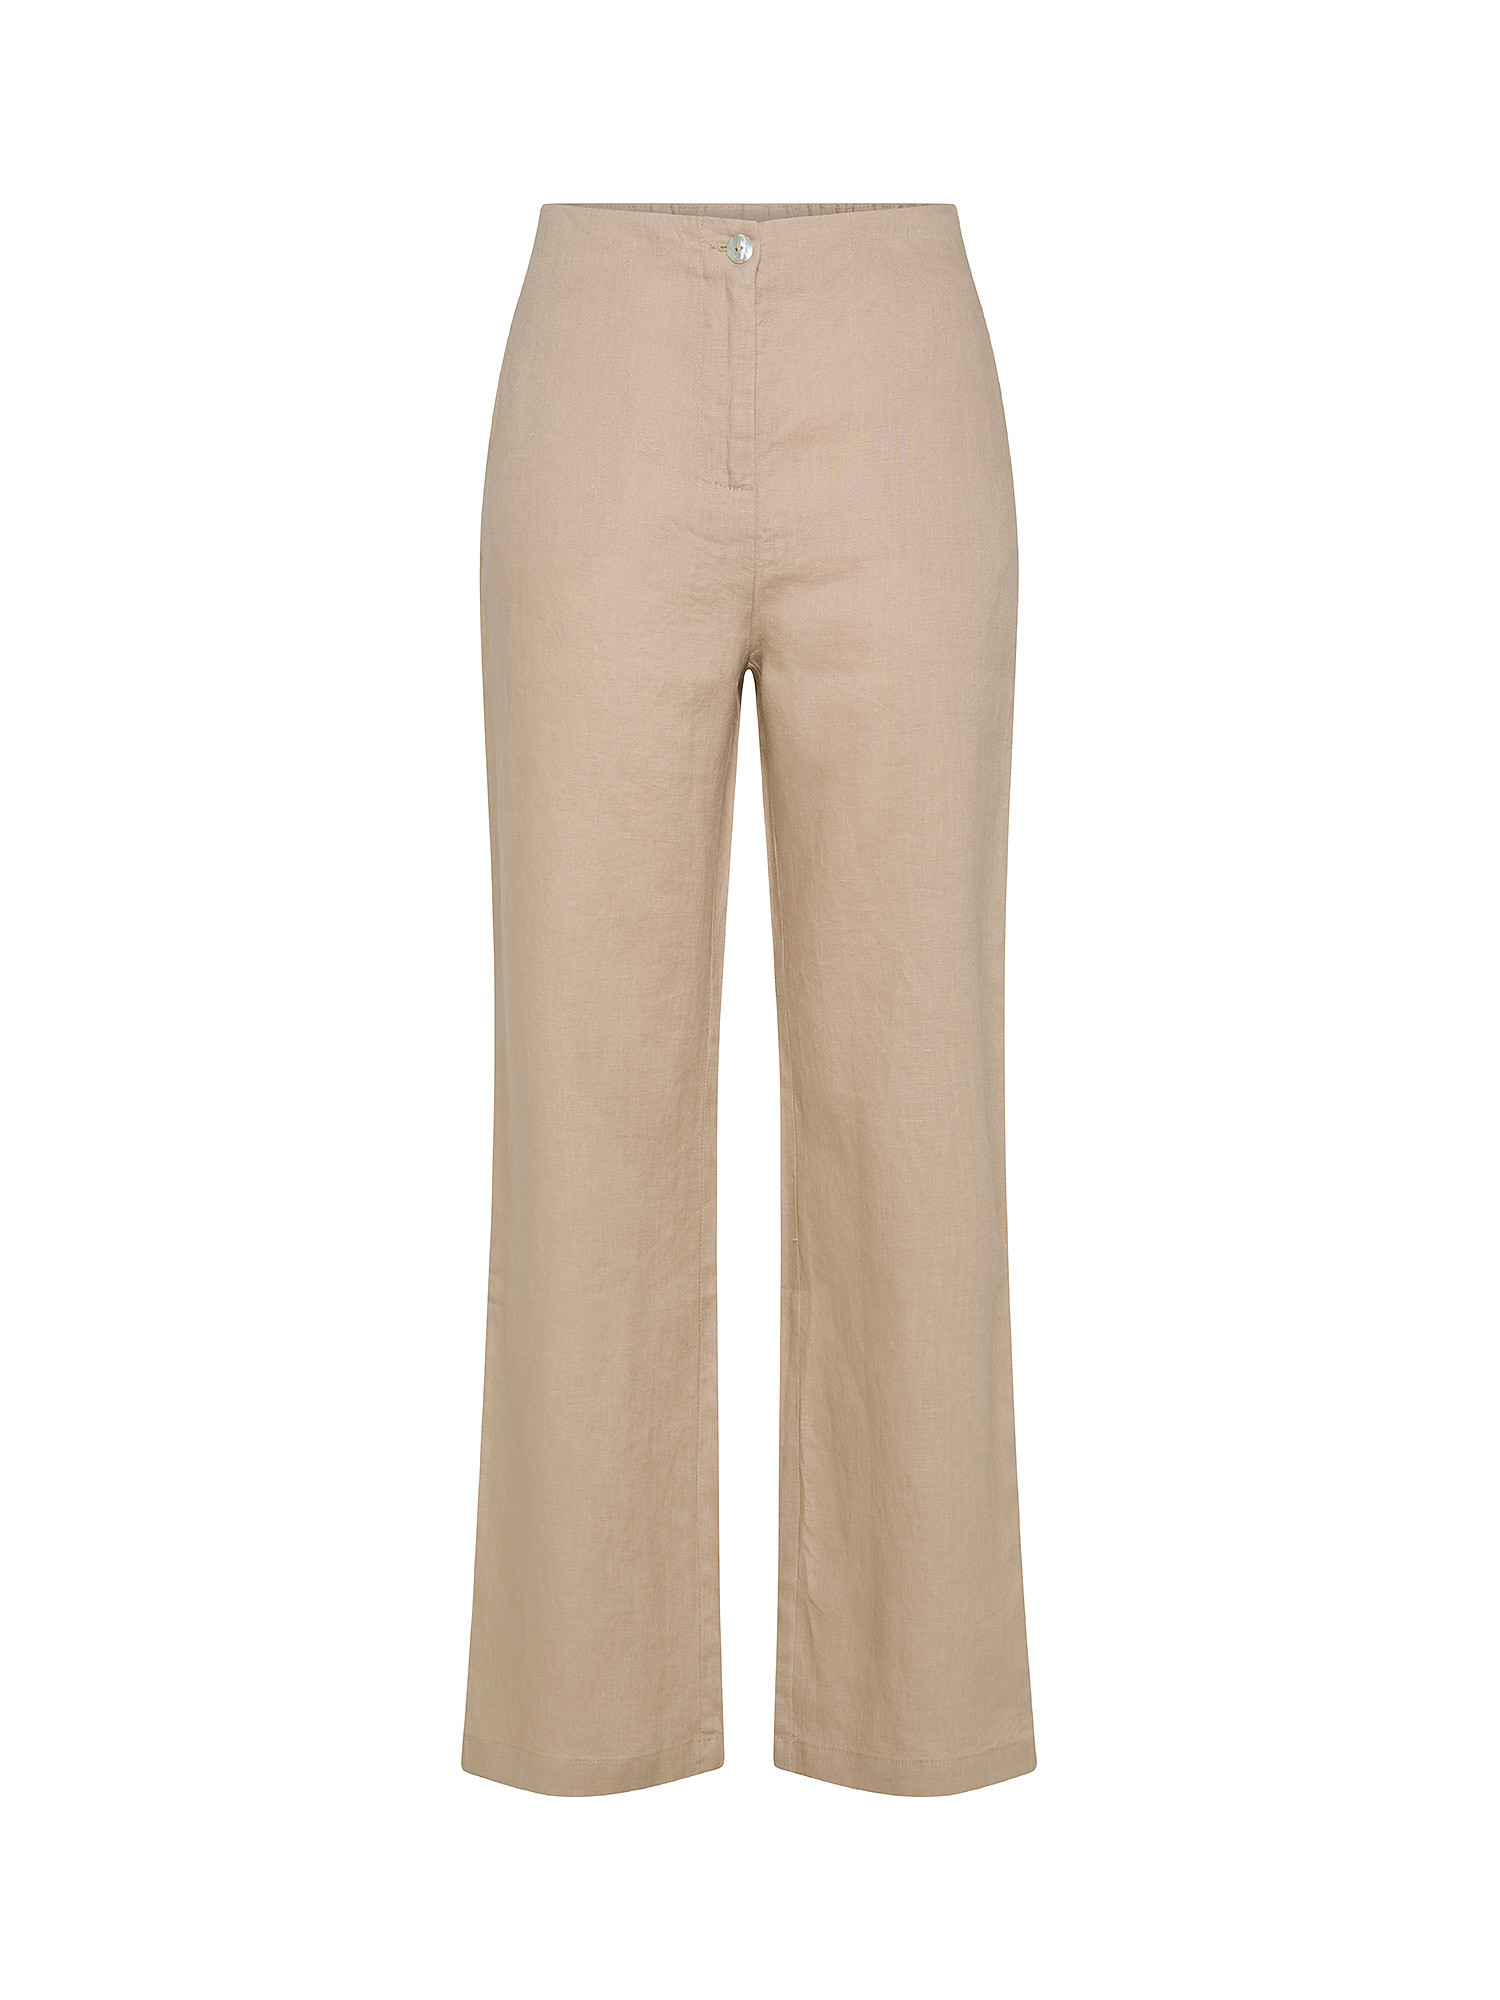 Koan - Straight linen trousers, Beige, large image number 0